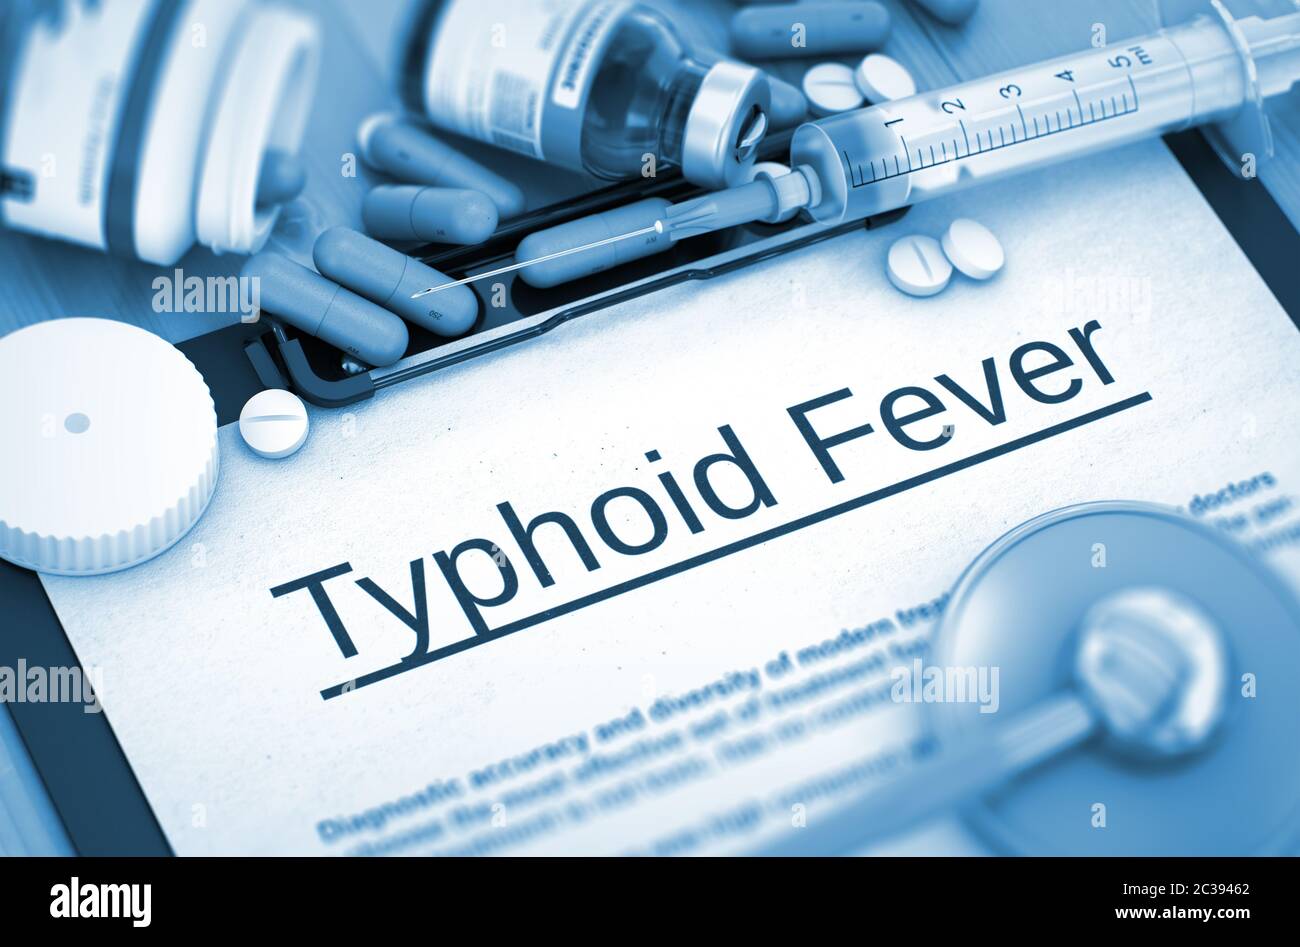 Typhoid Fever High Resolution Stock Photography and Images - Alamy